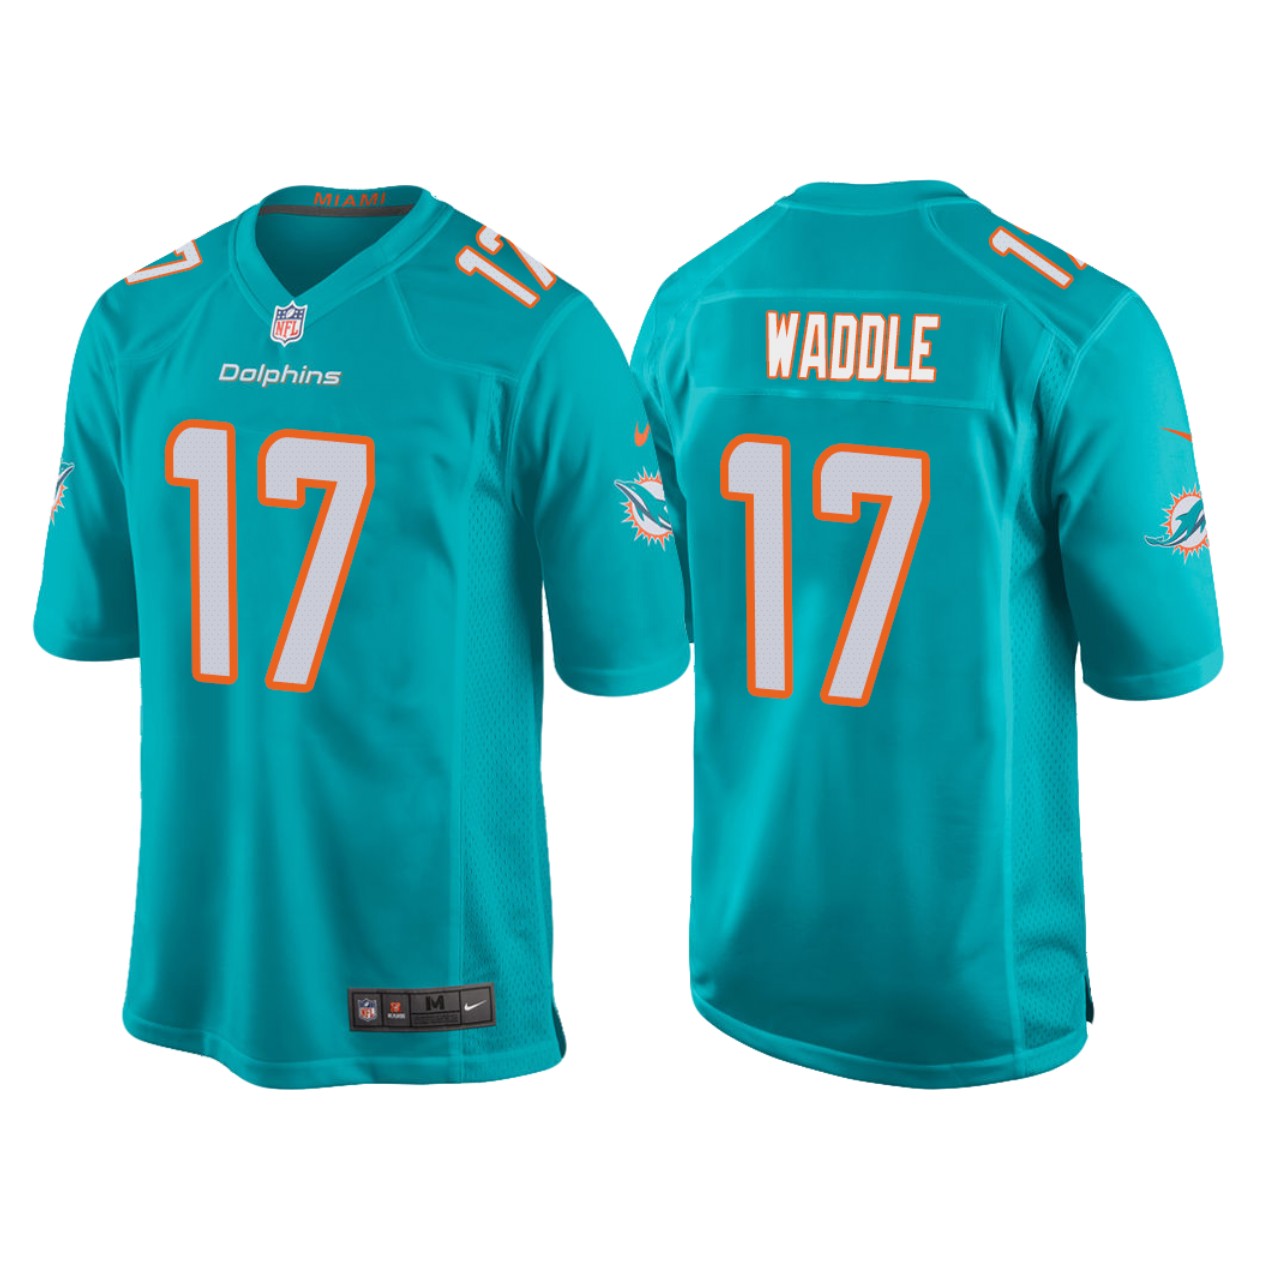 Officially Licensed Gear

Men's Miami Dolphins Jaylen Waddle Nike White
/ Aqua / Alternate White  Game Jersey

In Stock .